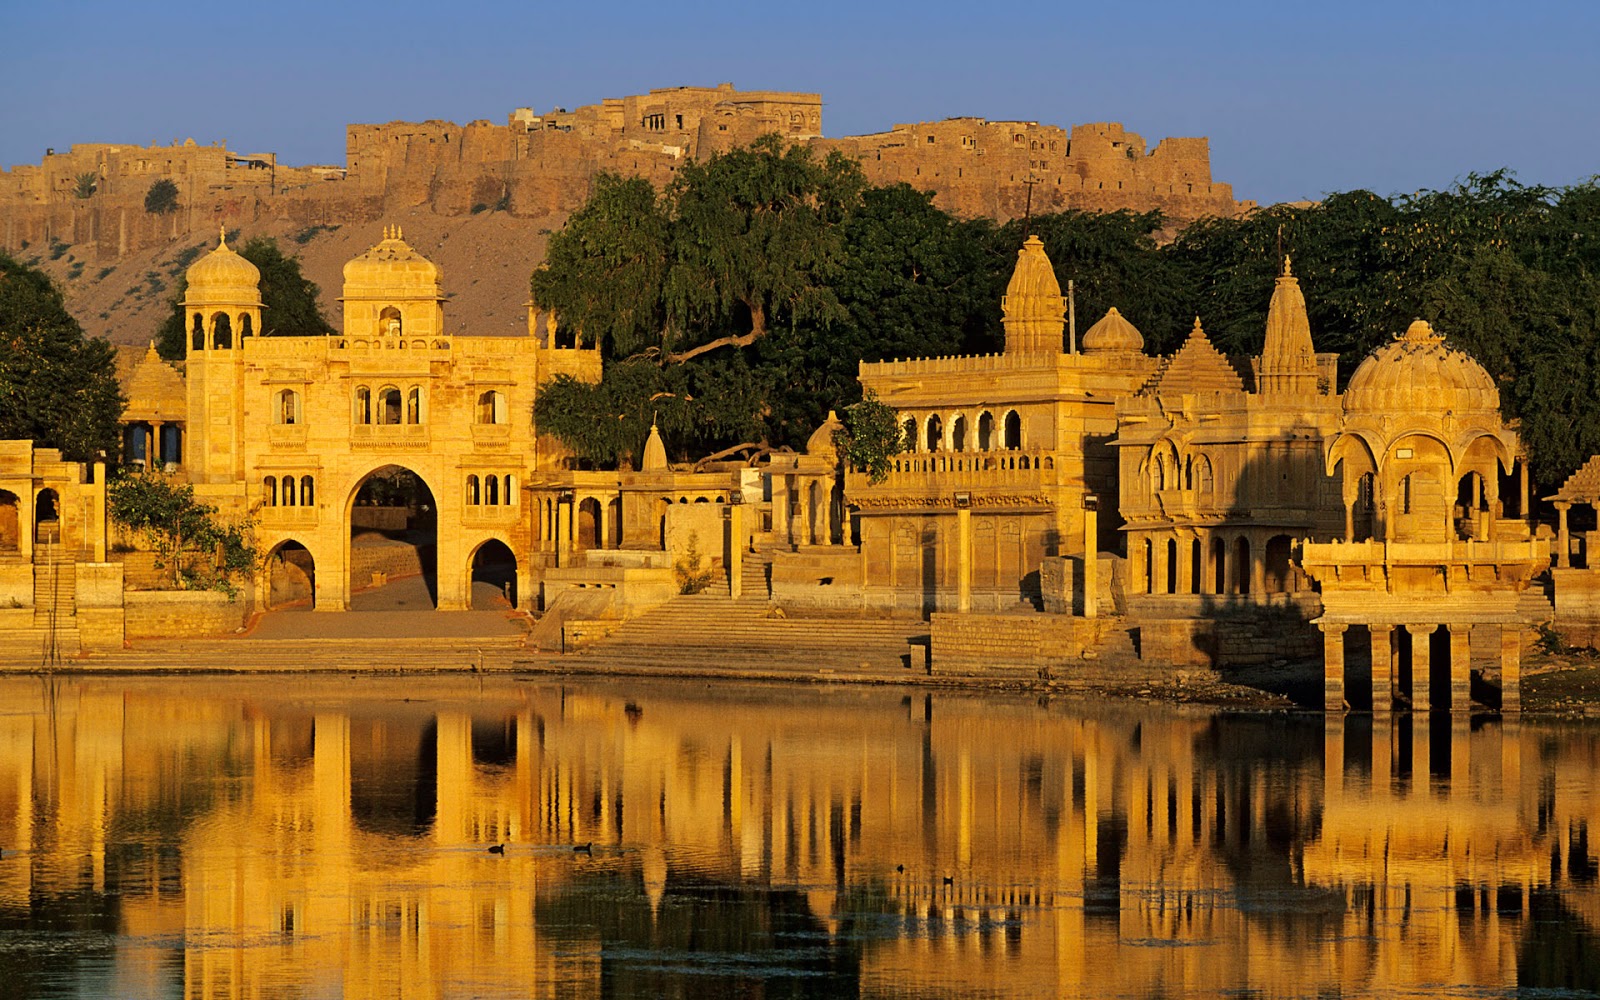 places to visit in jaisalmer near me